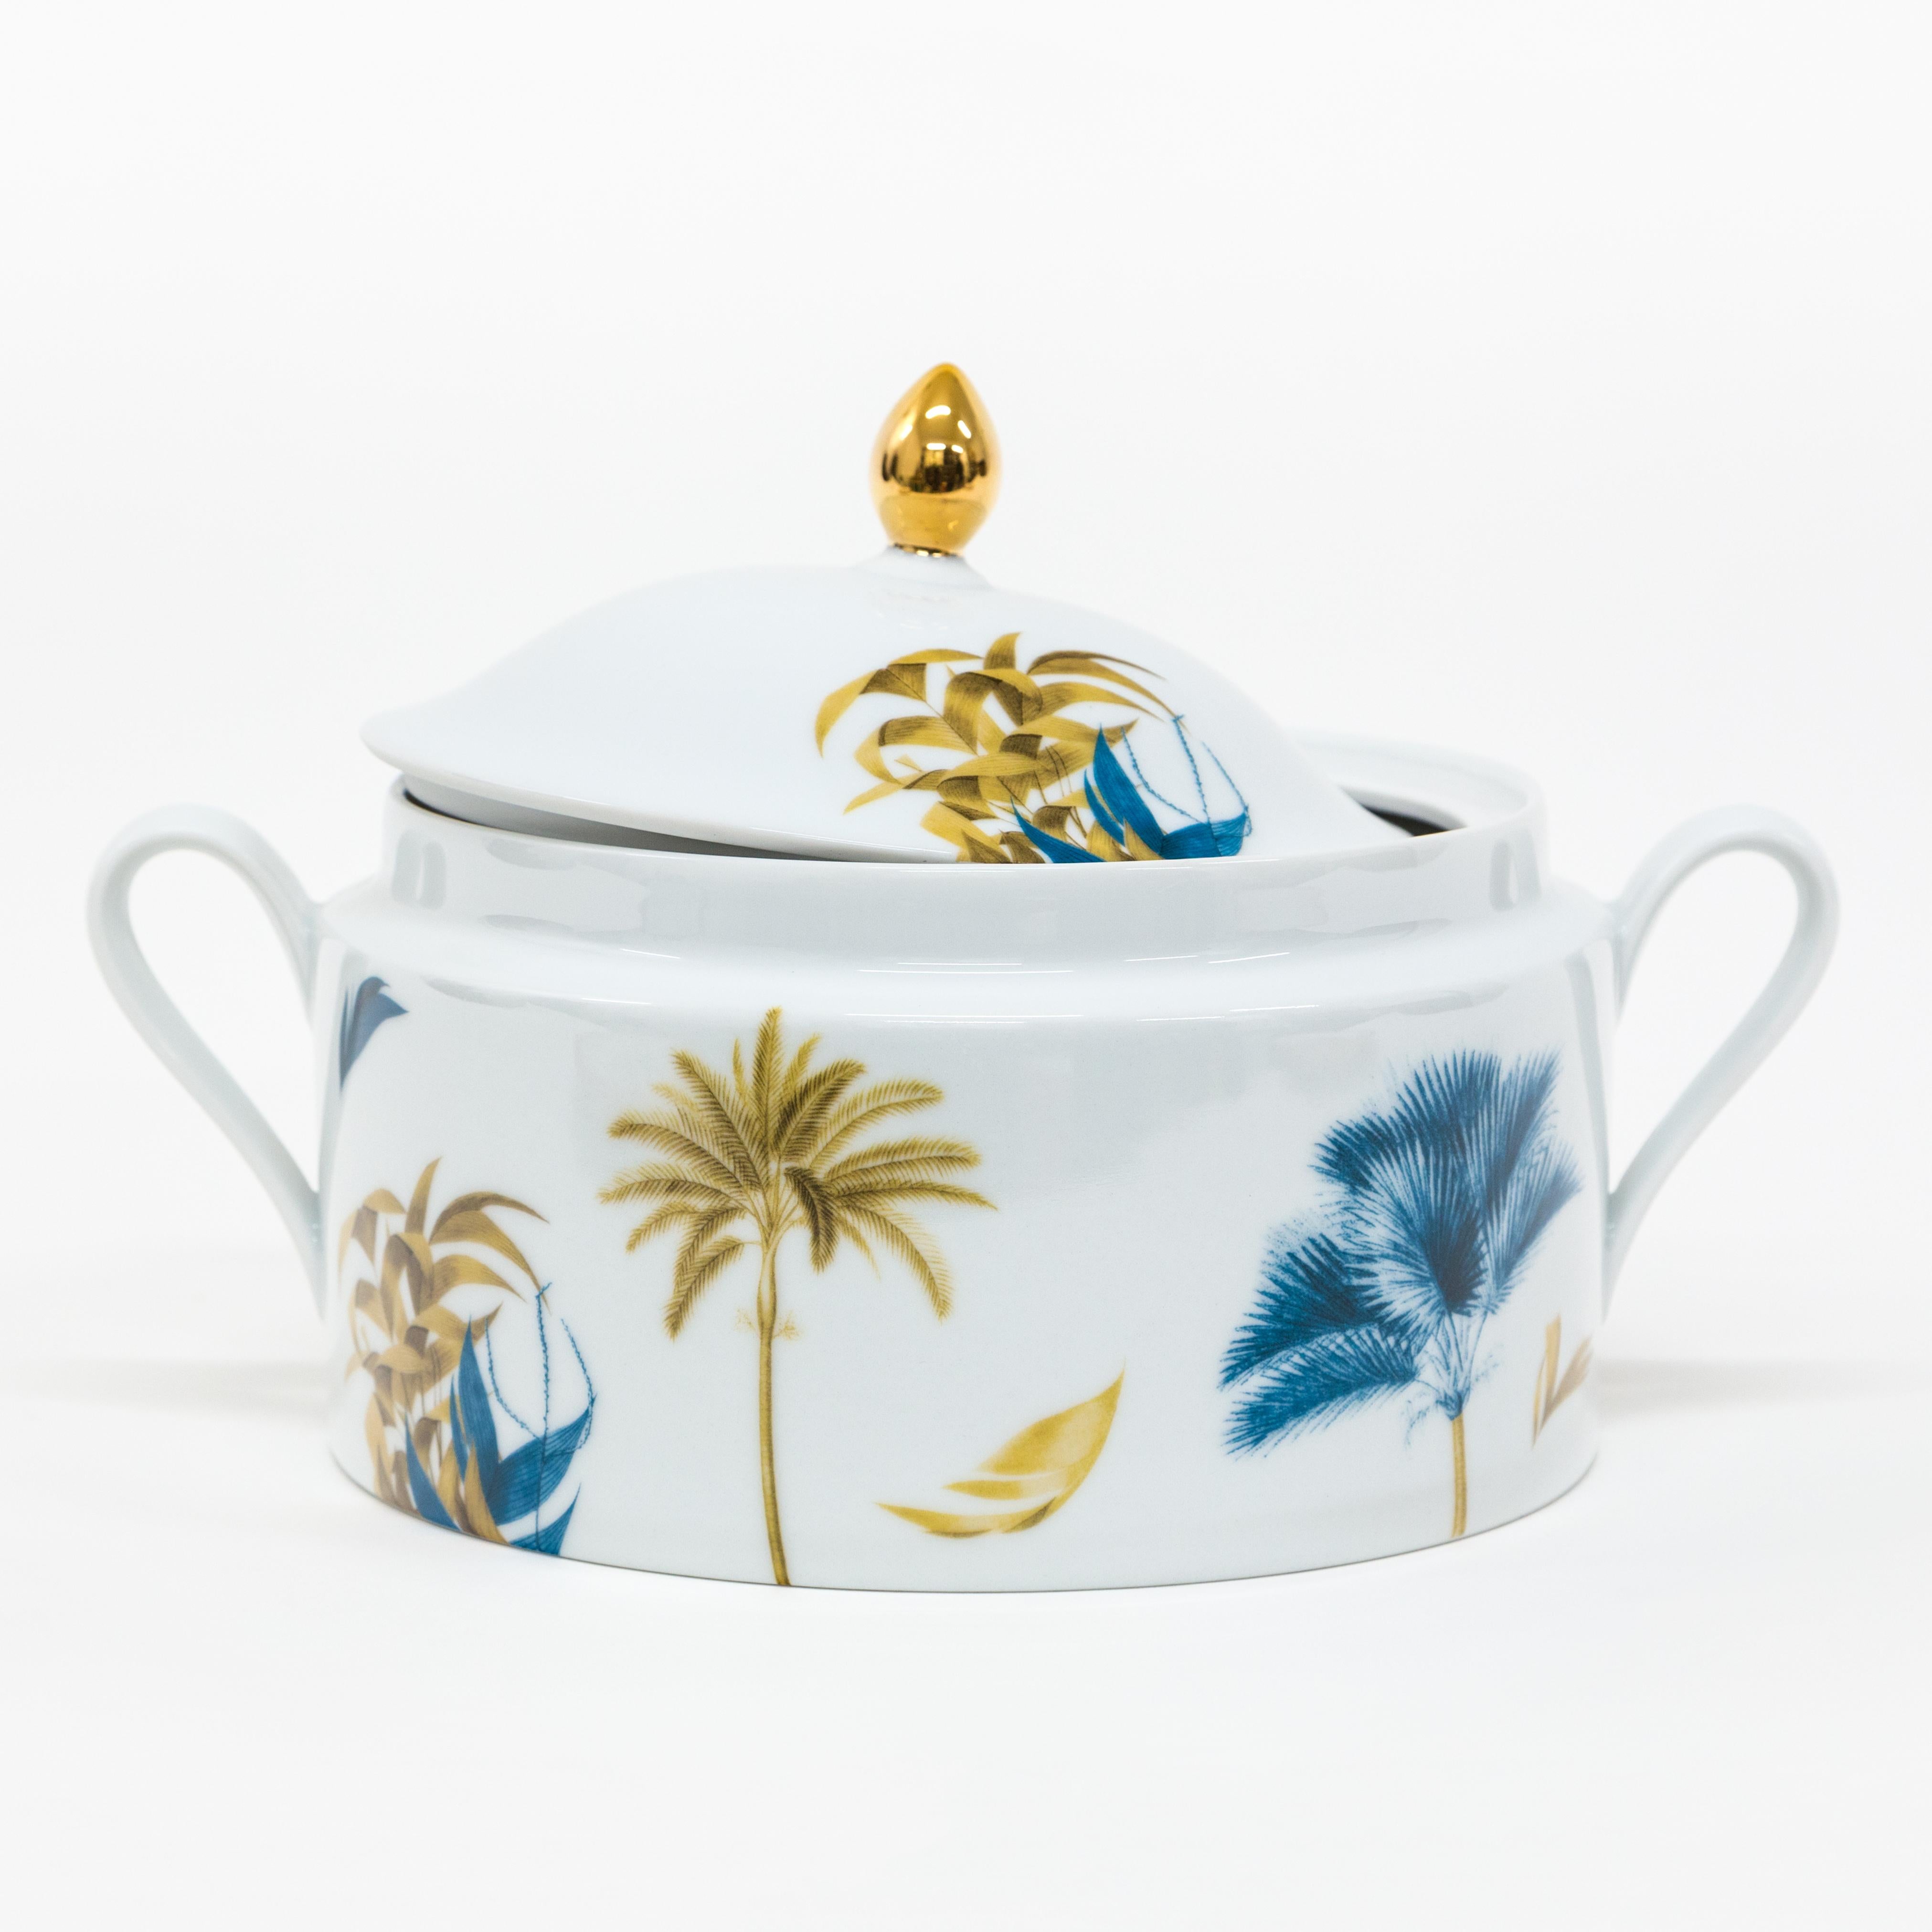 This soup tureen is a Grand Tour piece by Vito Nesta that is part of the Las Palmas porcelain collection which is inspired by Vito's extensive travels around the world. The prominence and use of a paradisiacal and tranquil motif create a welcoming